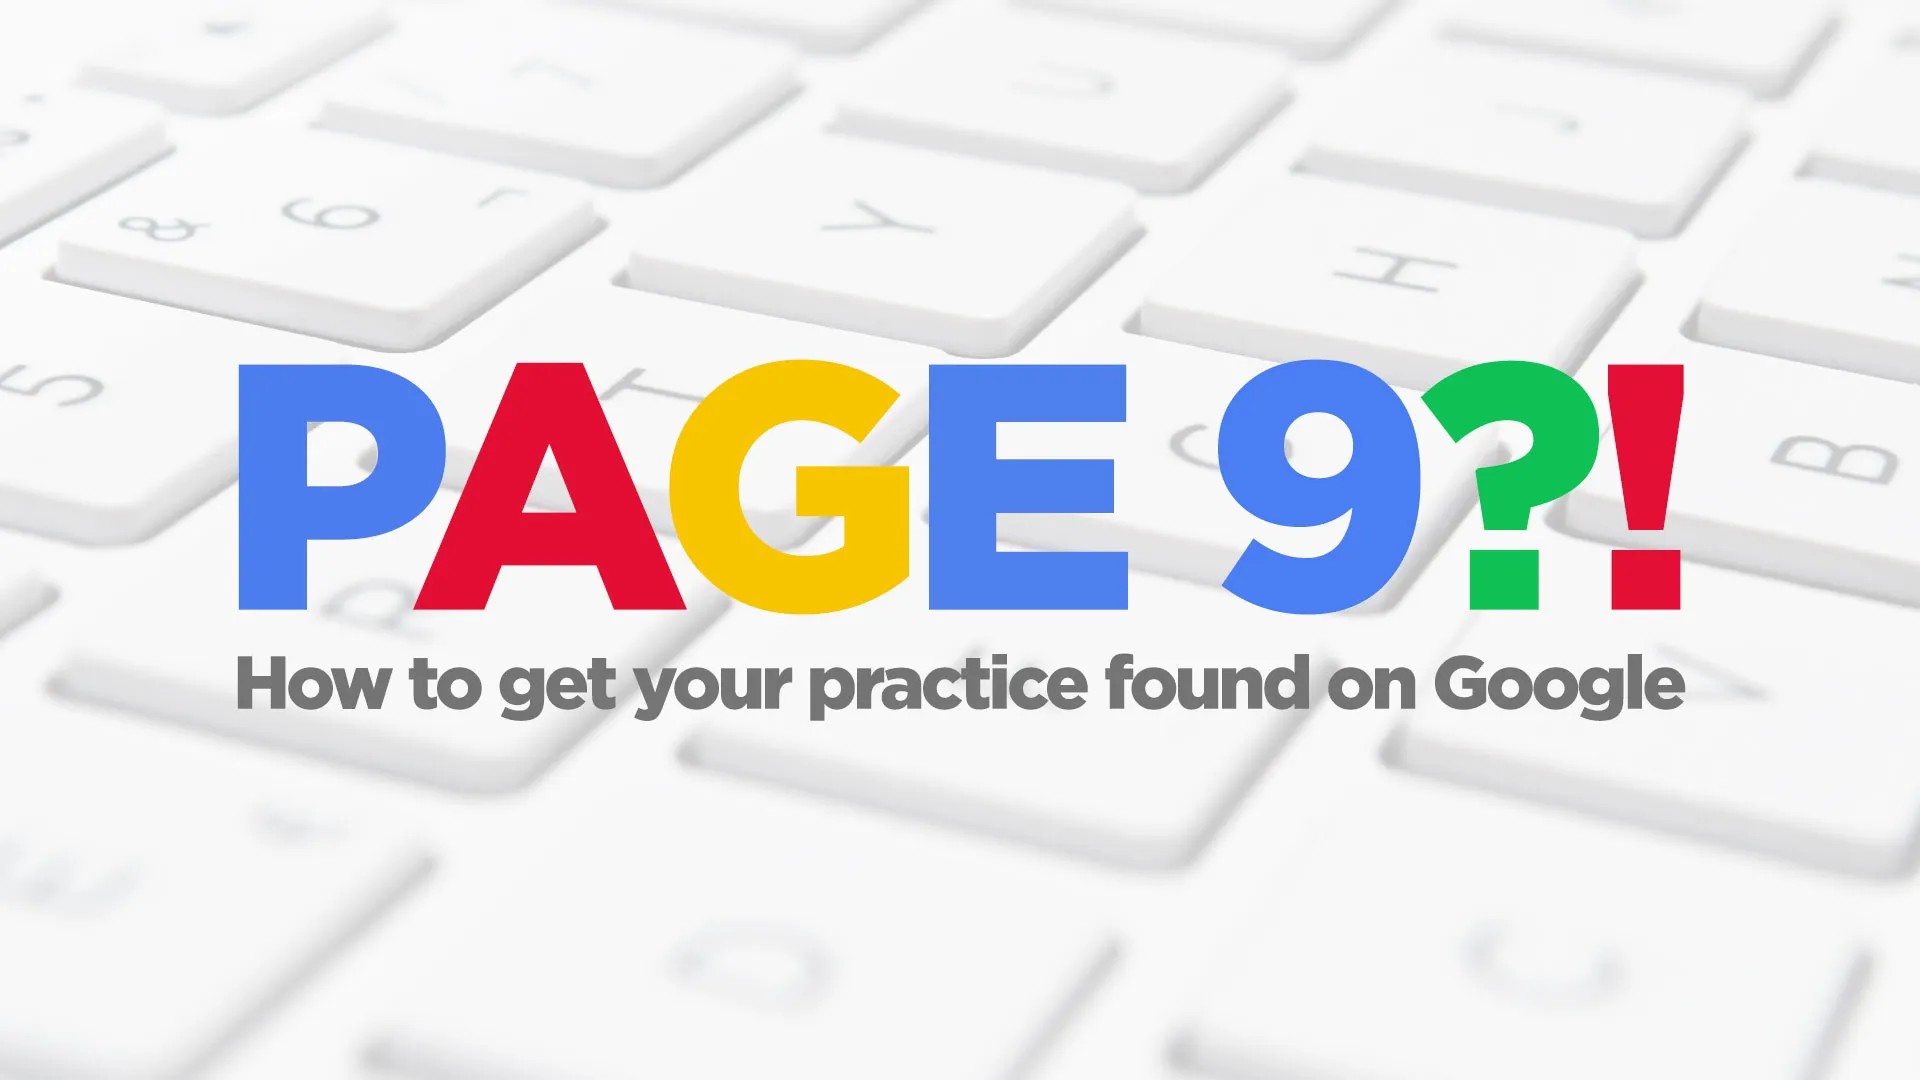 Page 9?! How to get your practice found on Google